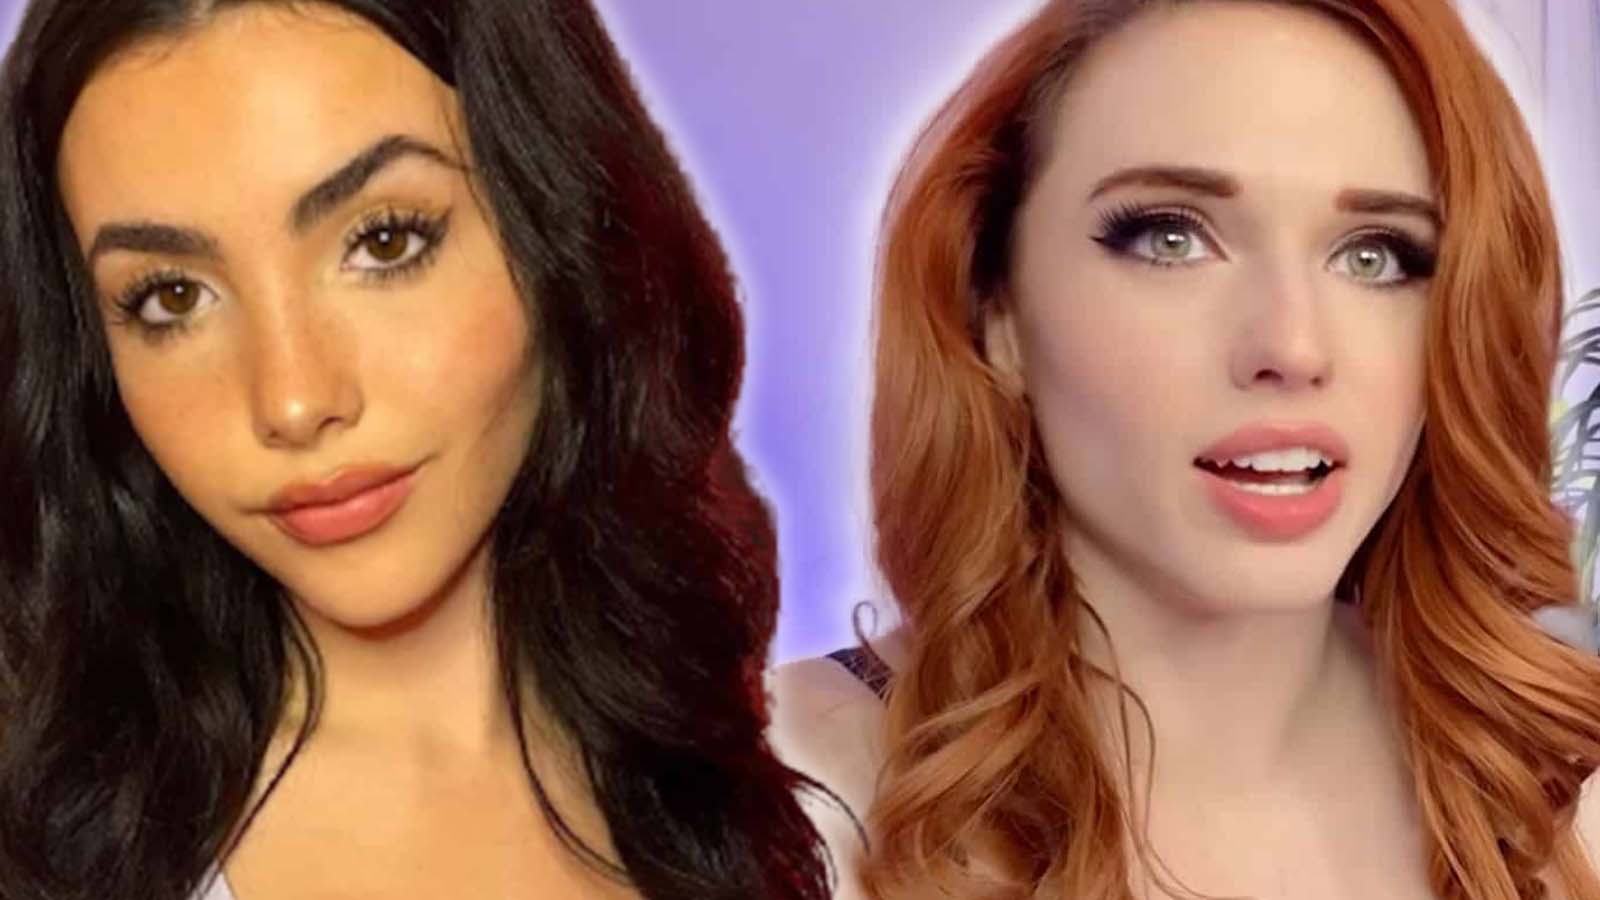 Andrea Botez explains why she had to mute Twitch star Amouranth - Dexerto